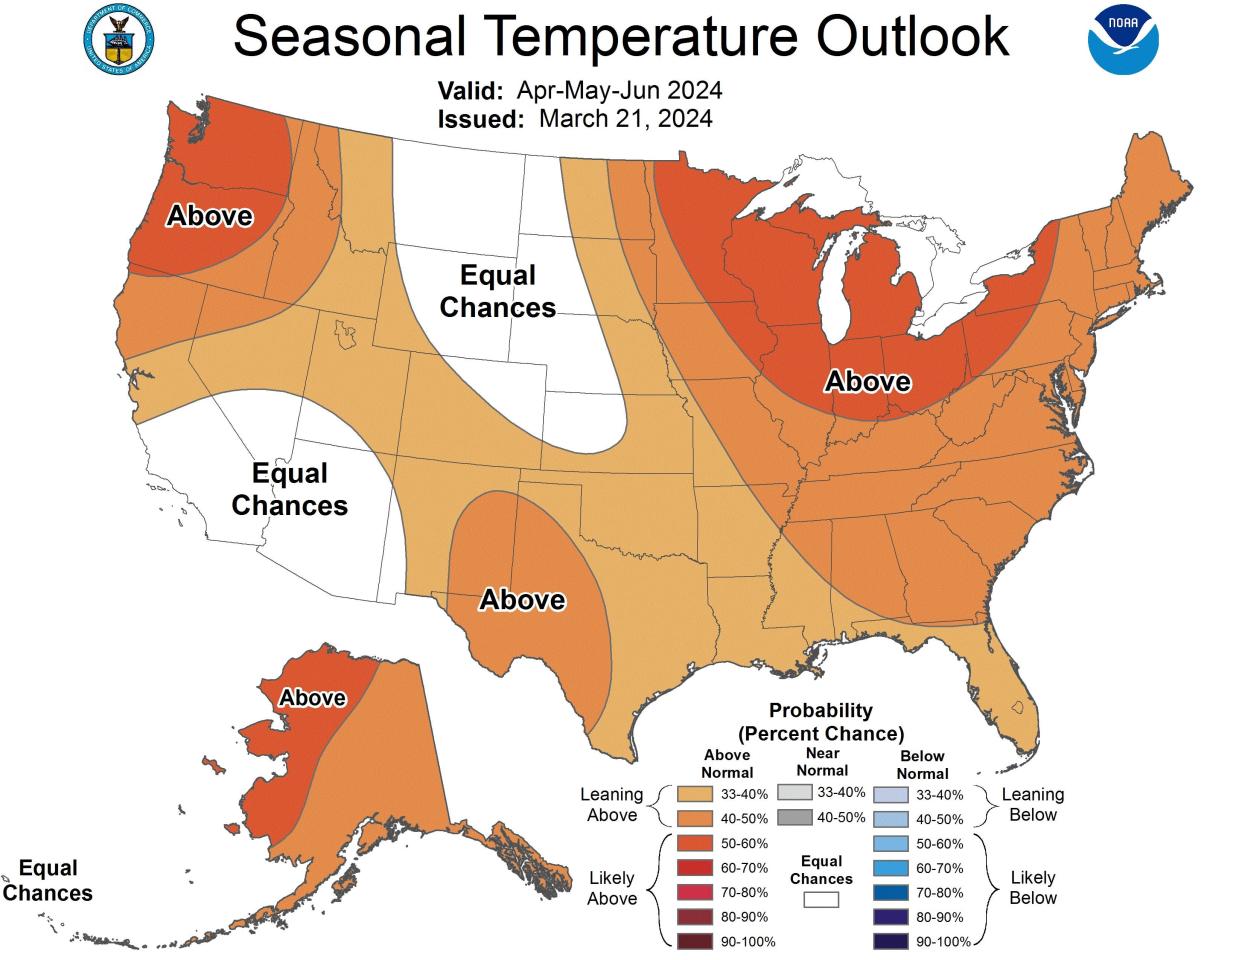 Widespread warmer-than-average temperatures (areas in orange and red) are expected across most of the nation from April-June, federal forecasters announced on March 21.